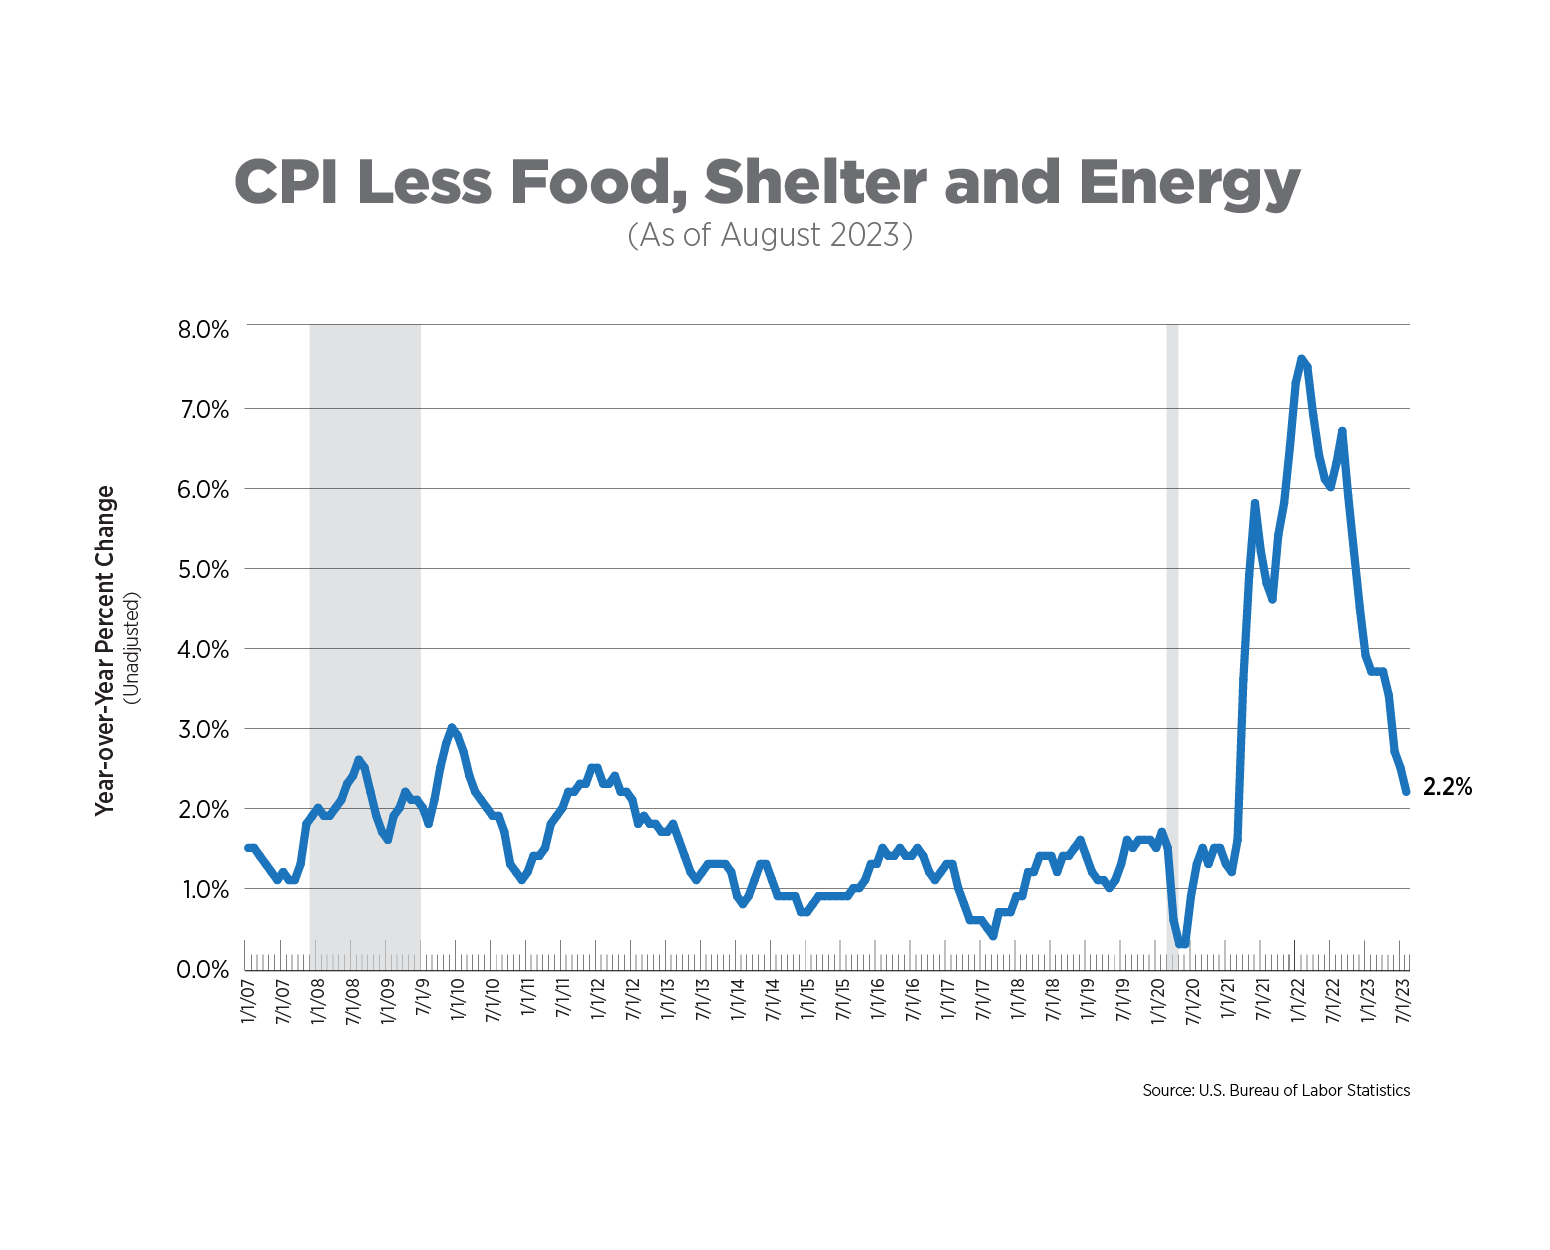 cpi less food, shelter, and energy as of august 2023